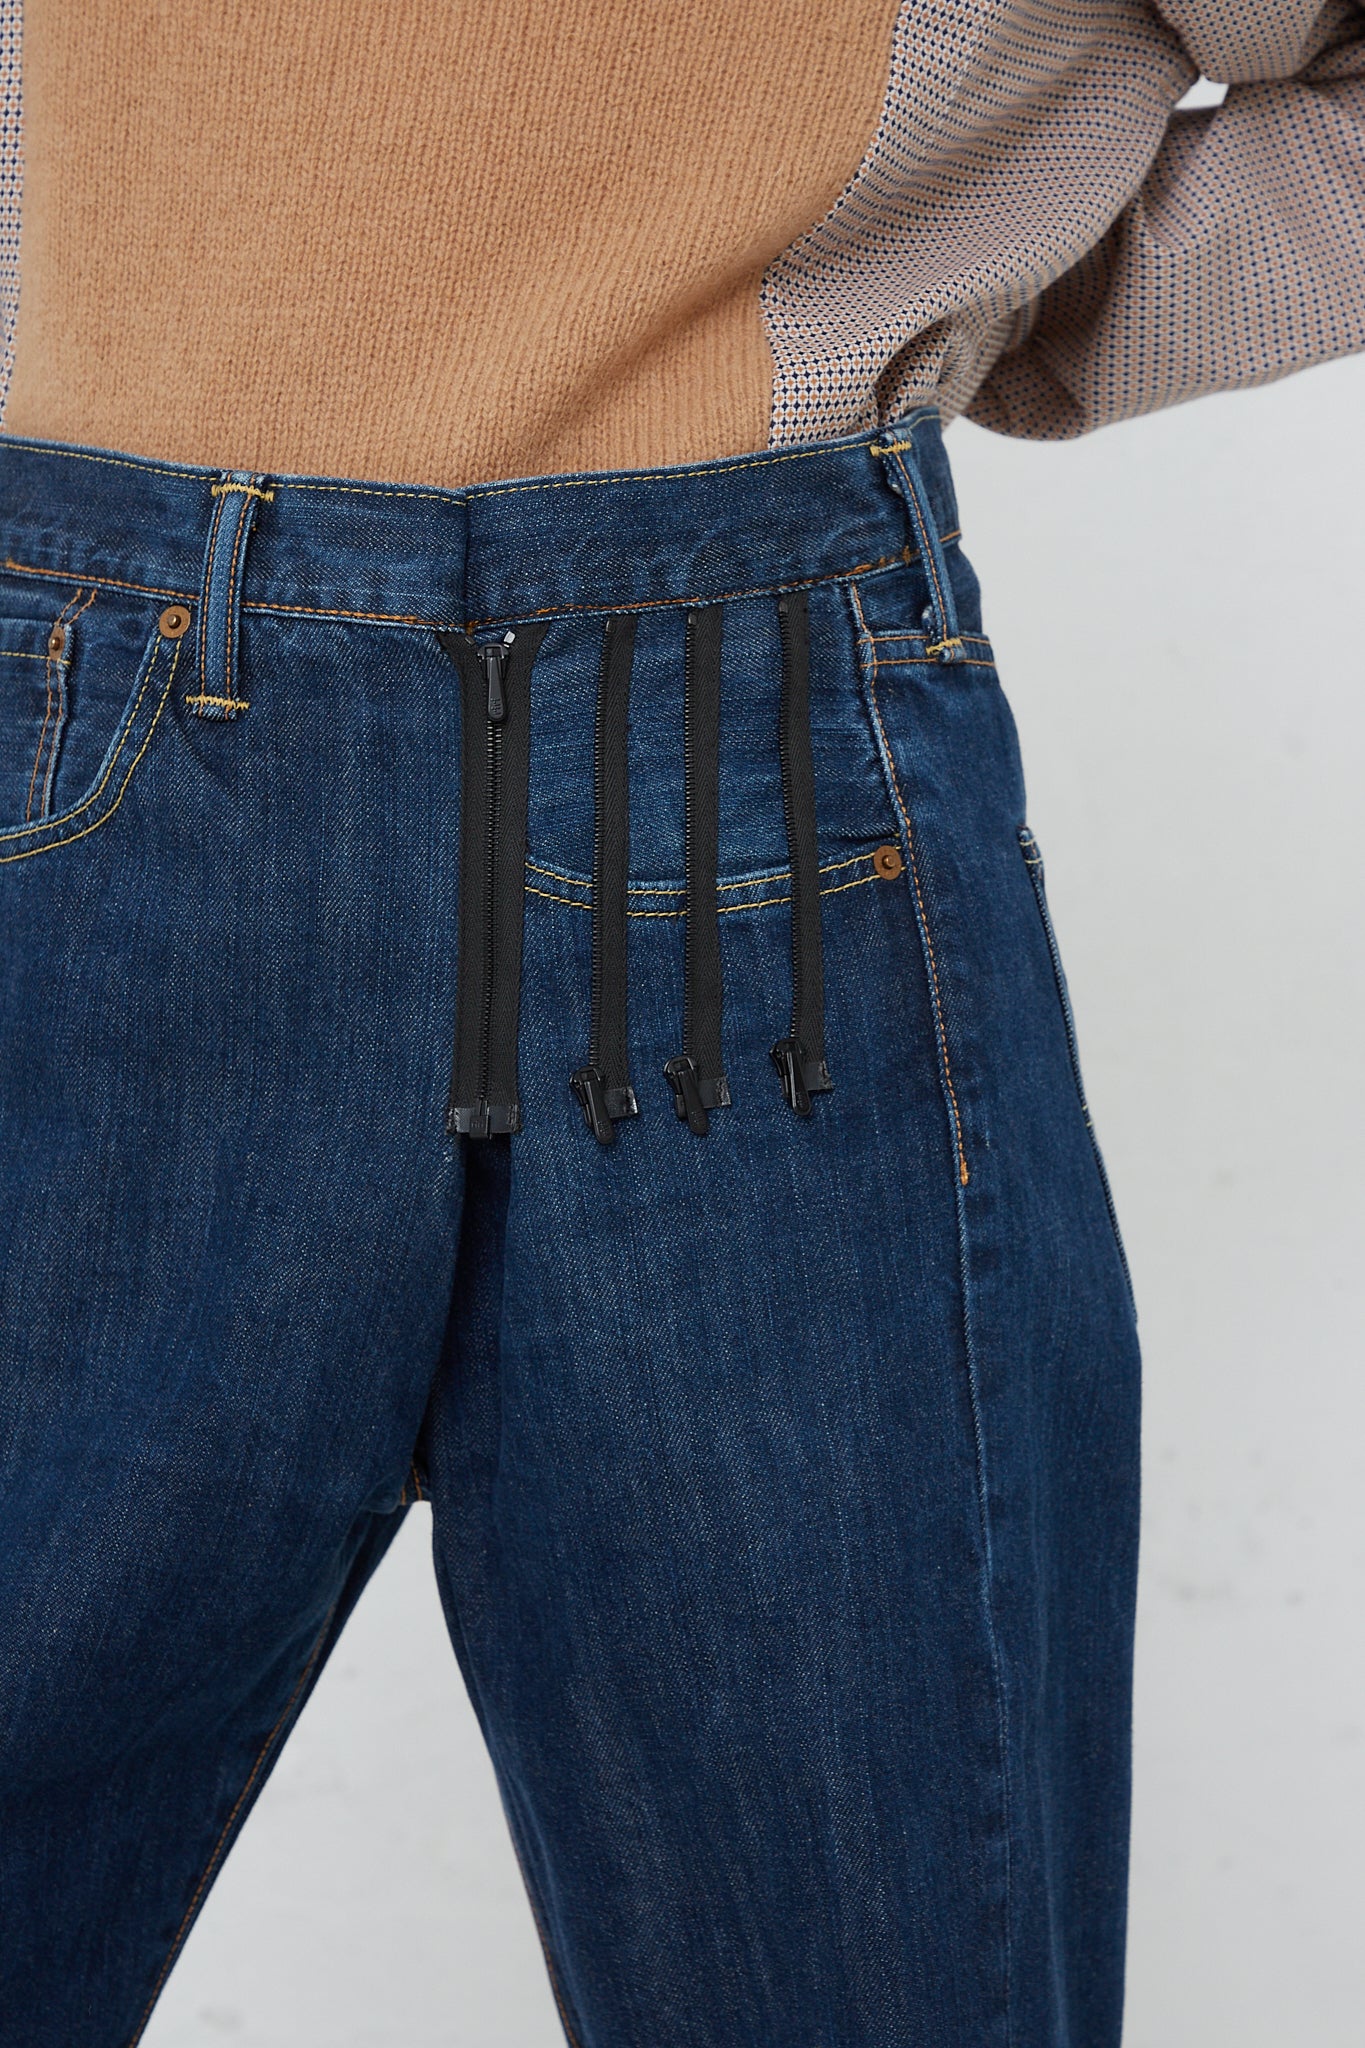 The back of a woman's Bless No. 75 SMLXL Readymade Vintage Levis in Dark Blue jeans with a zipper.